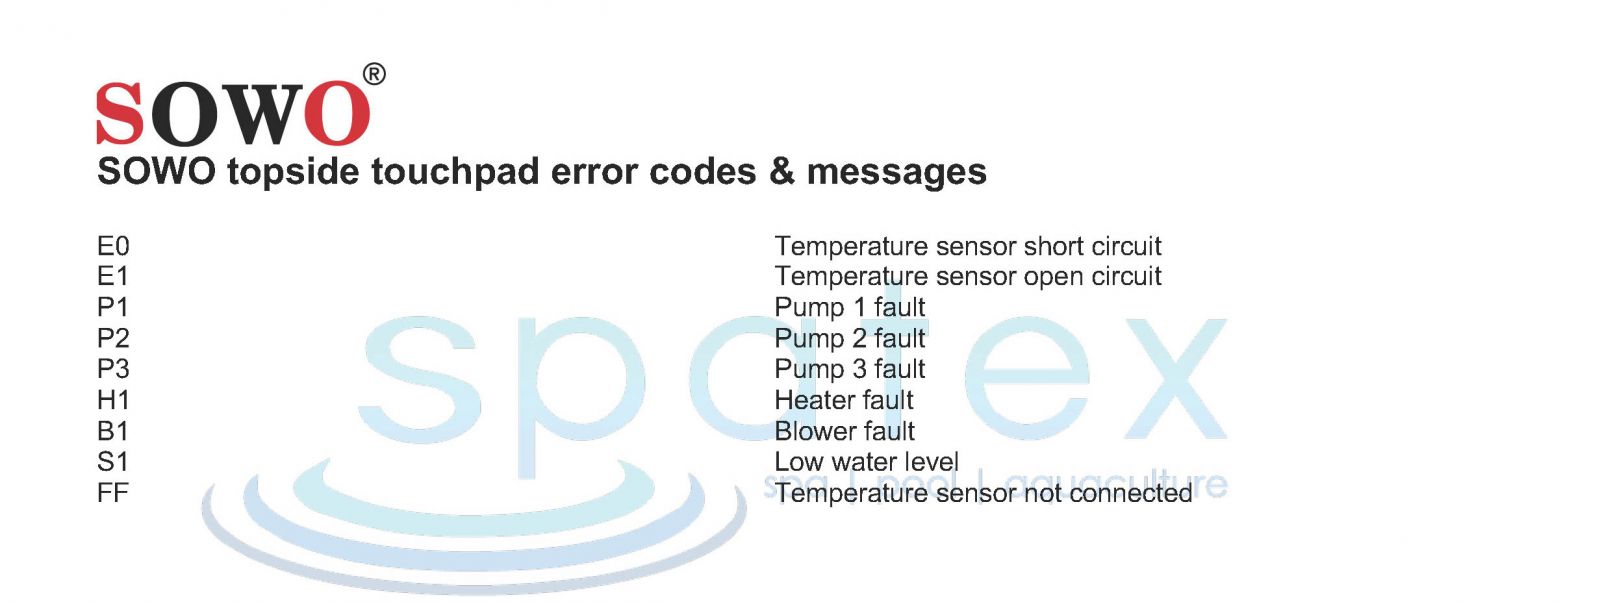 Sowo spa touchpad error codes and messages